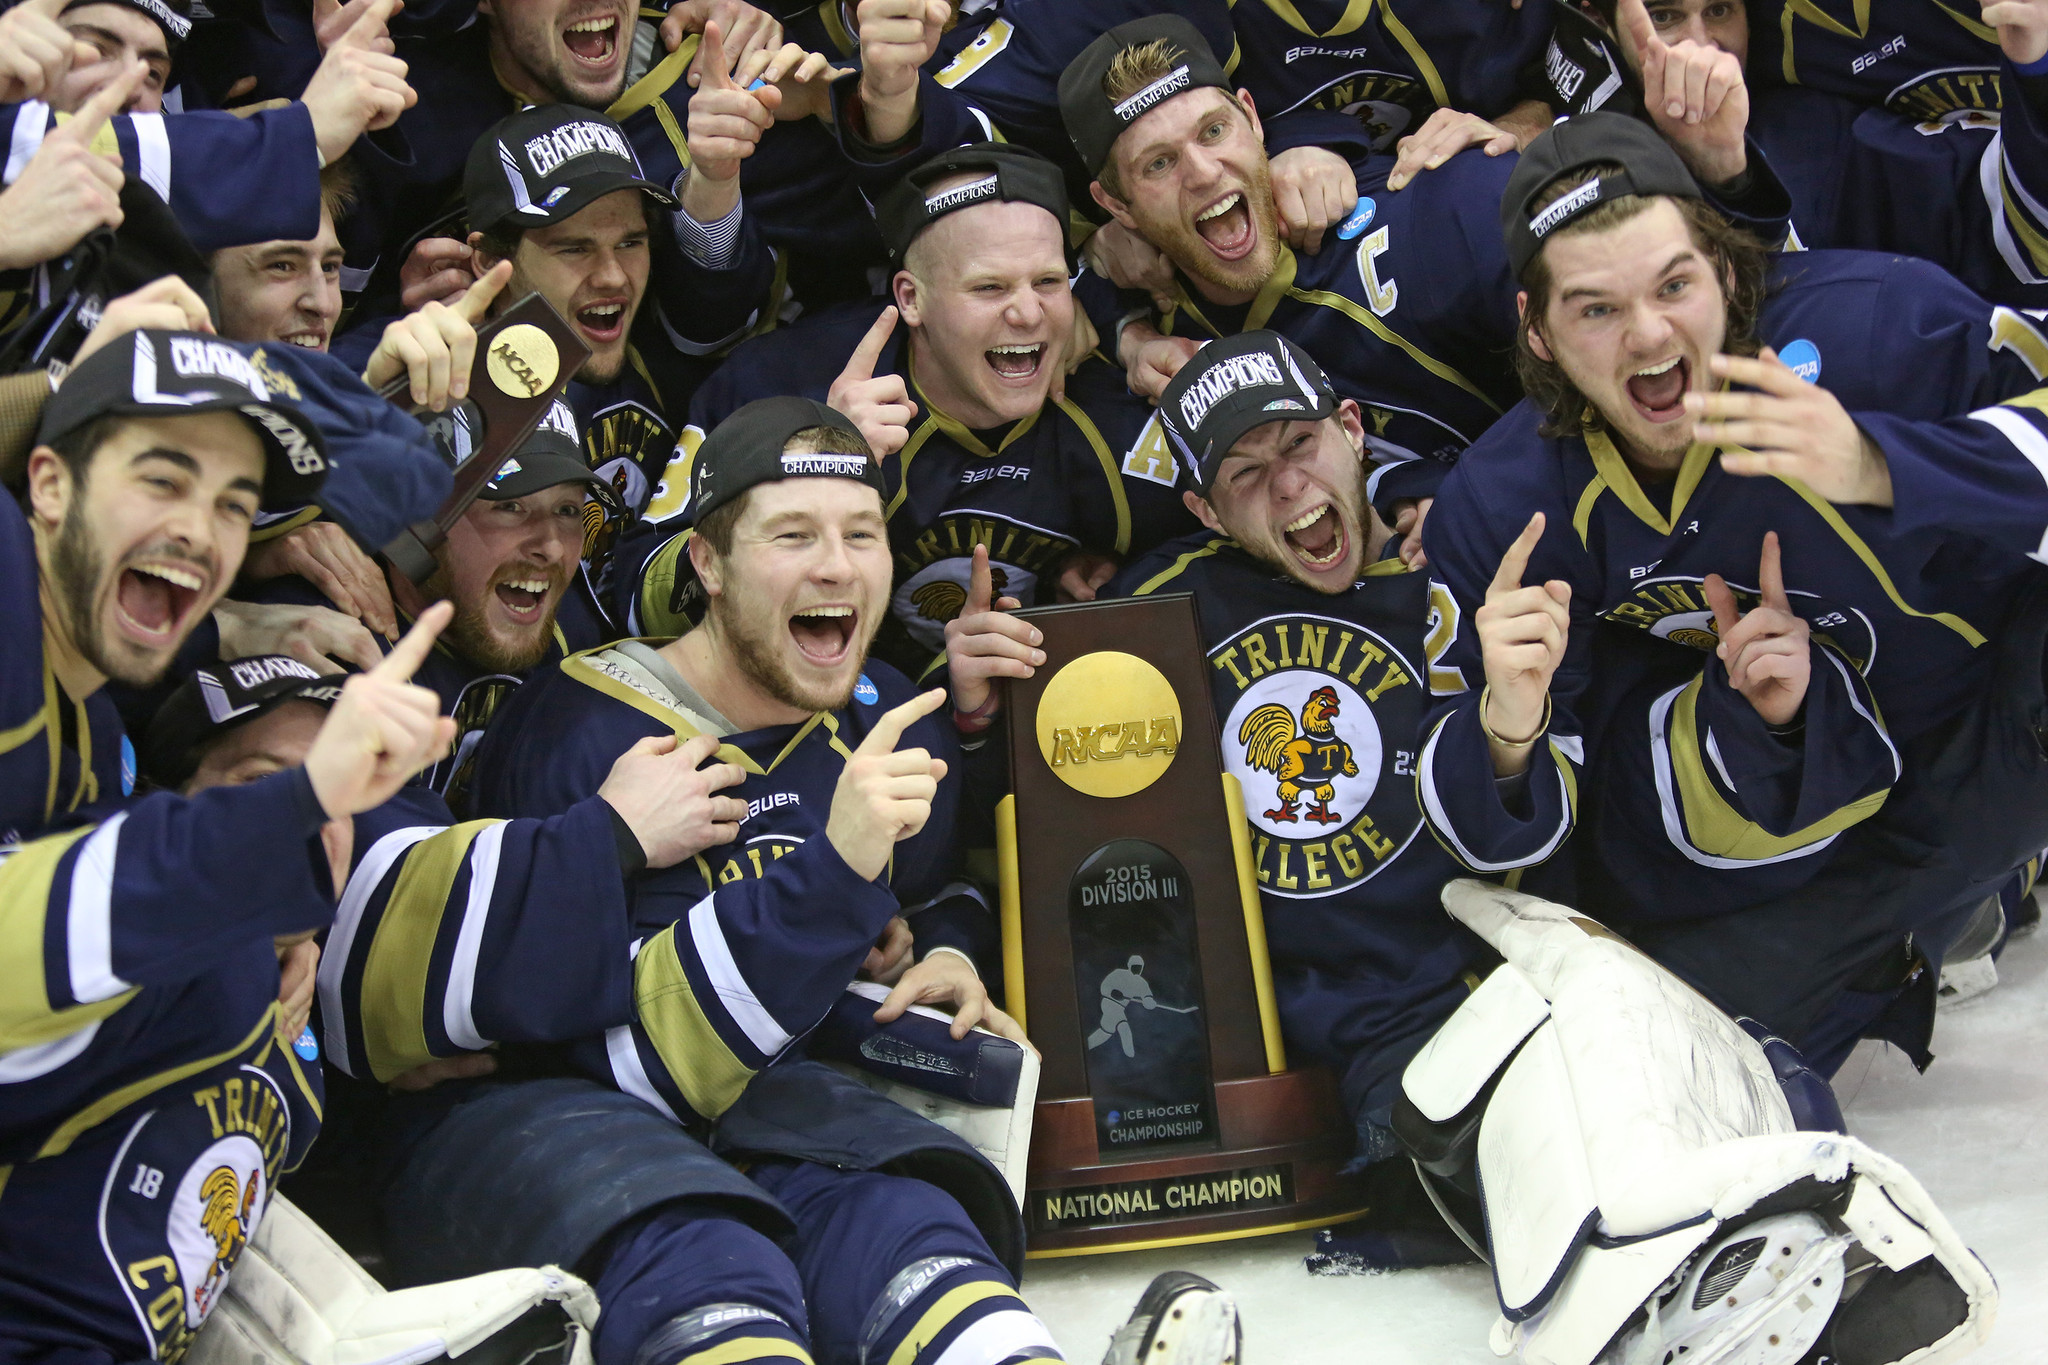 Hearty Hartford For NCAA Division III Champion Trinity College